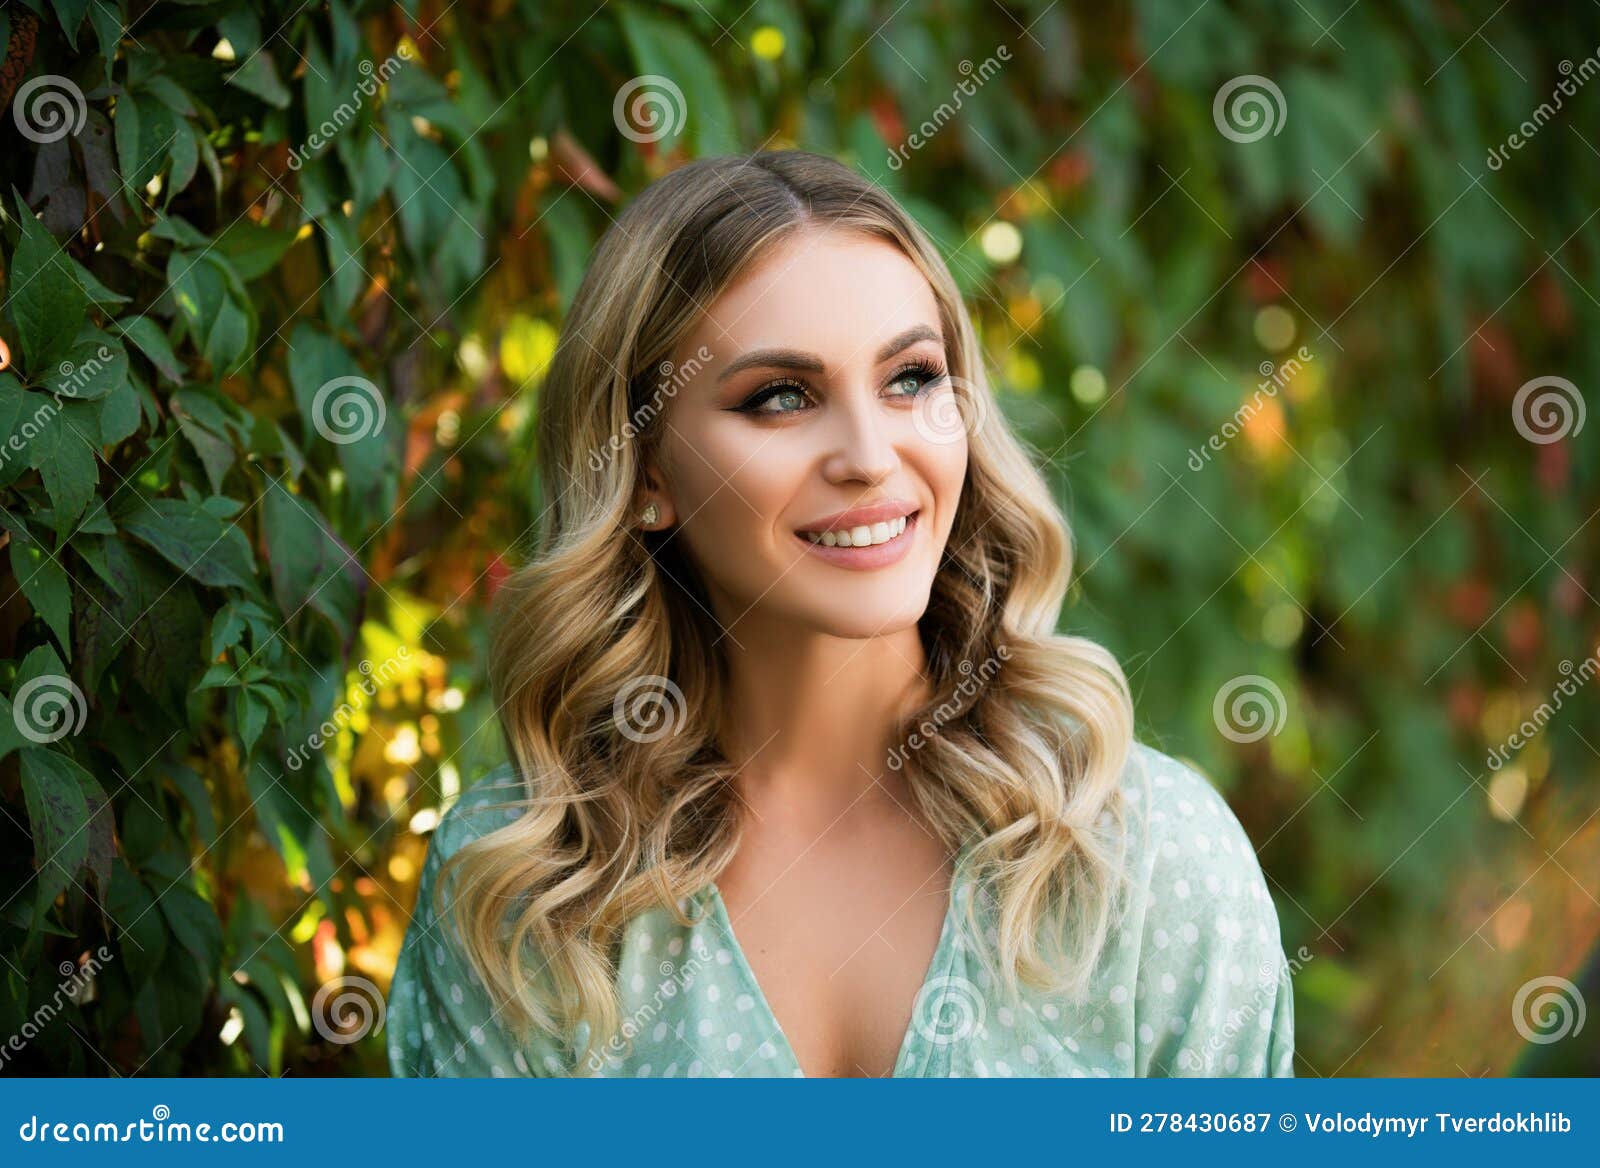 portrait of young woman looking eways in summer park outdoor. romantic girl with beauty face. woman with romantic smile